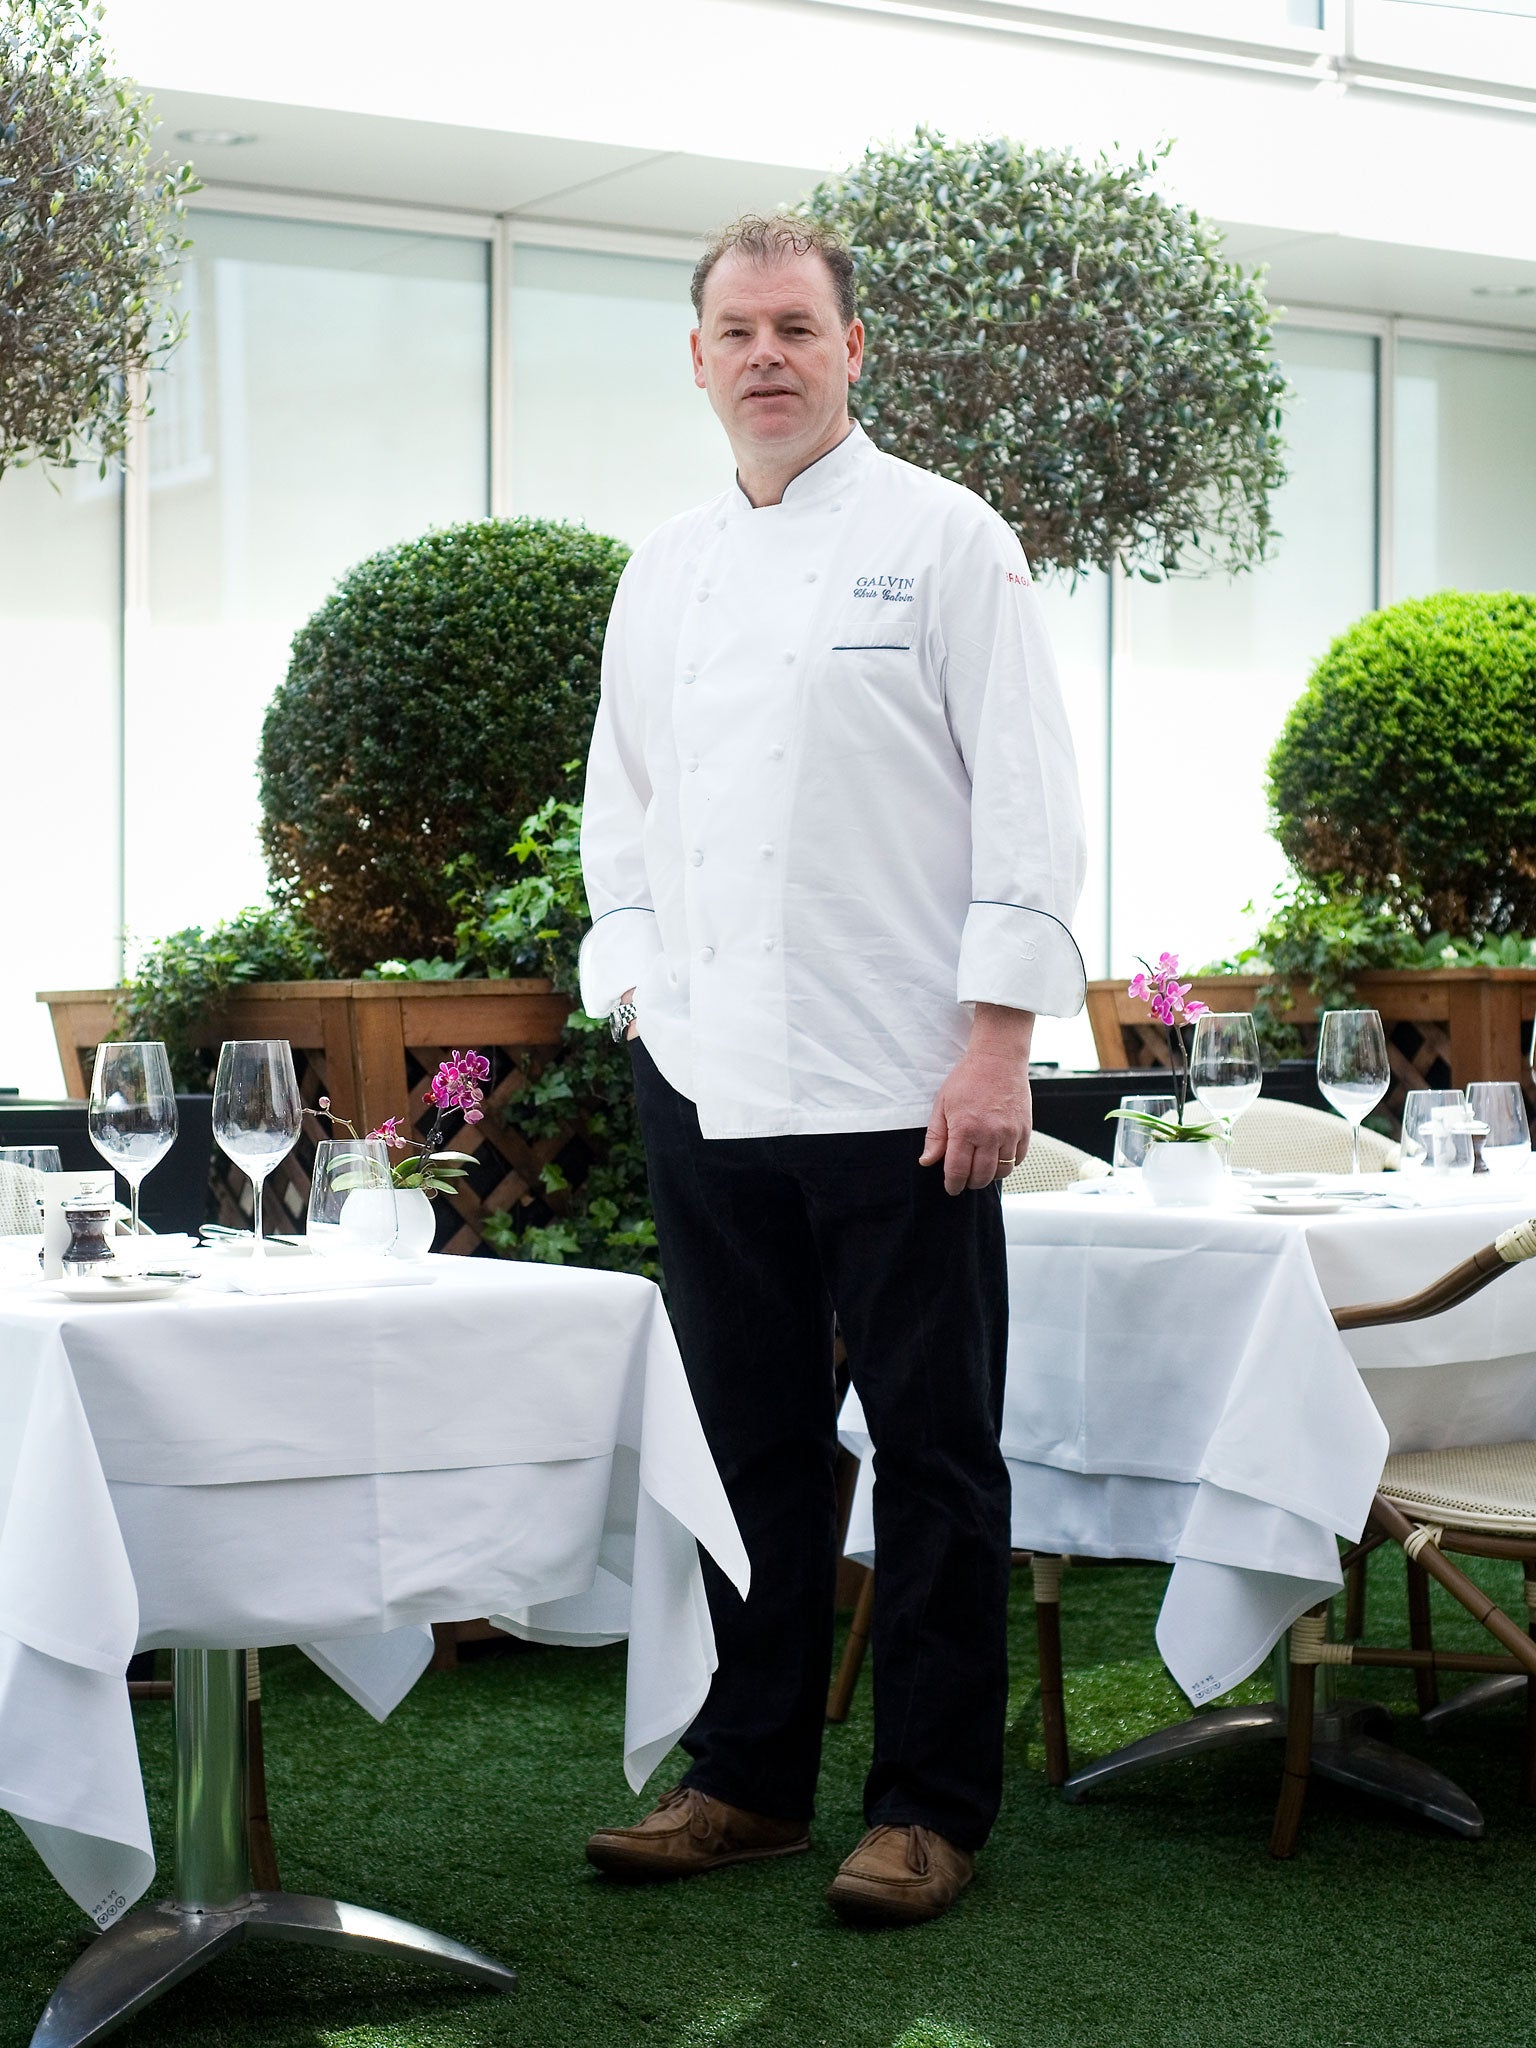 Galvin is a Michelin-starred chef and co-owner of seven family-run restaurants